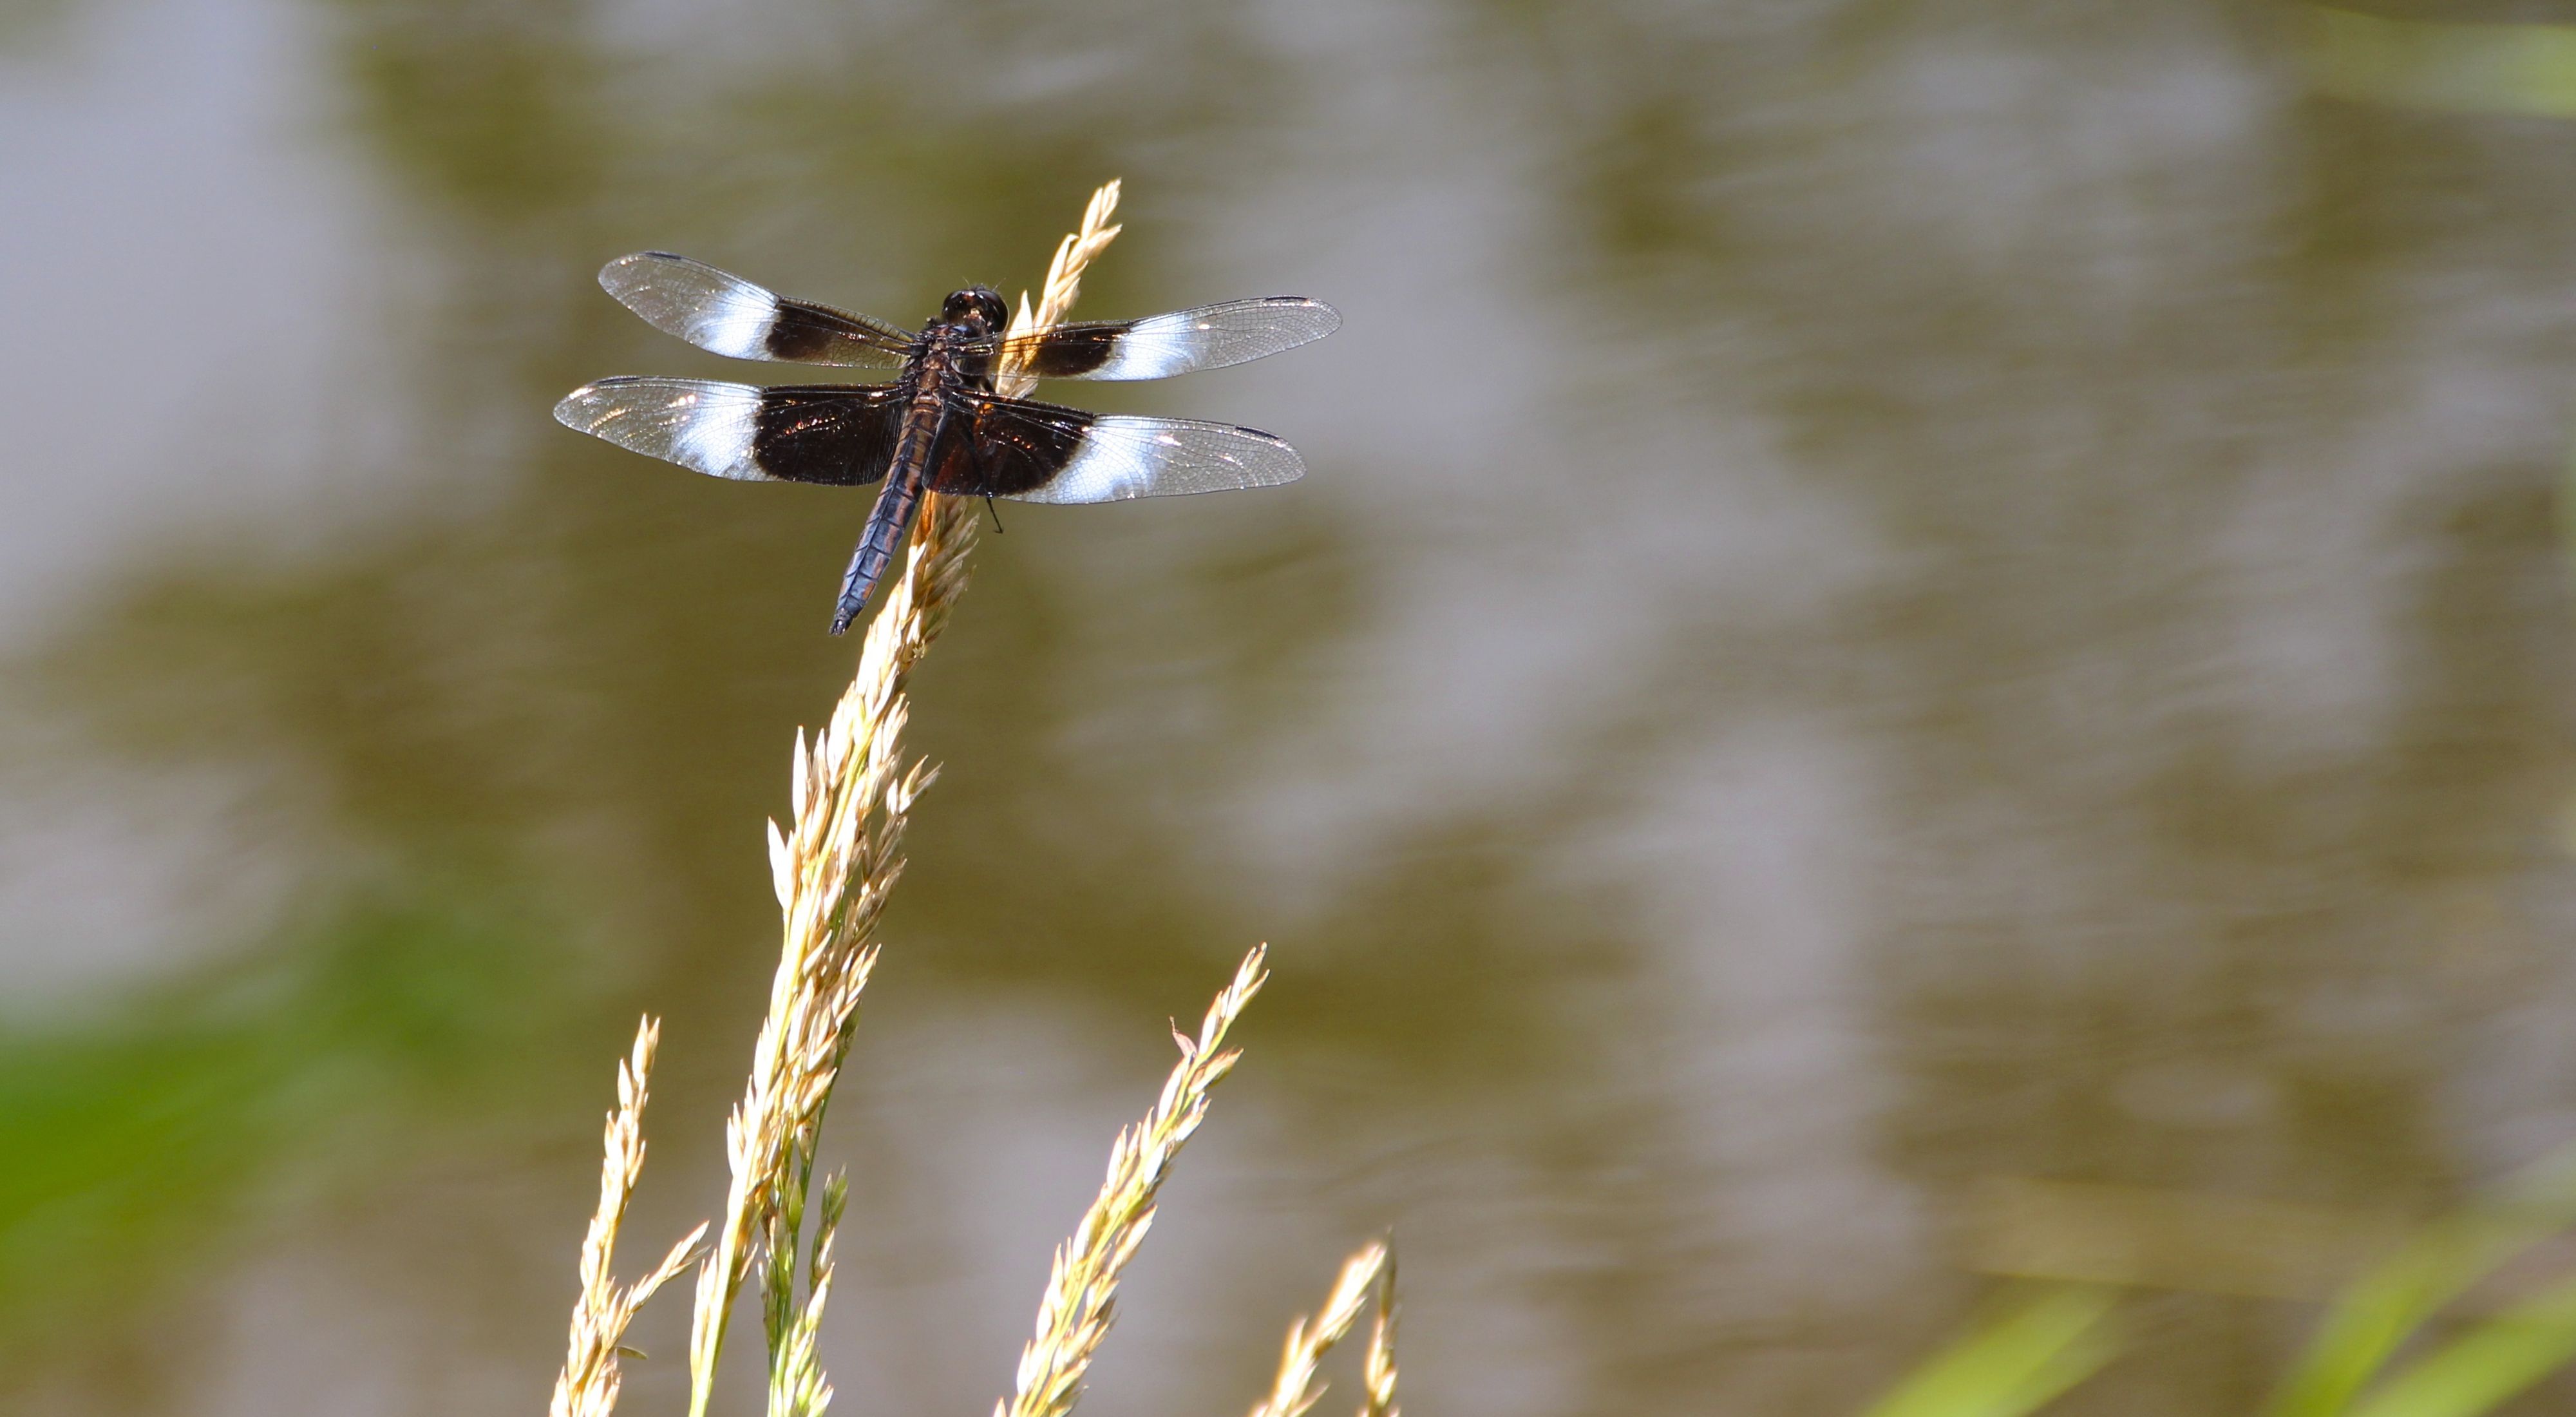 Dragonfly at Virginia's Bottom Creek Gorge